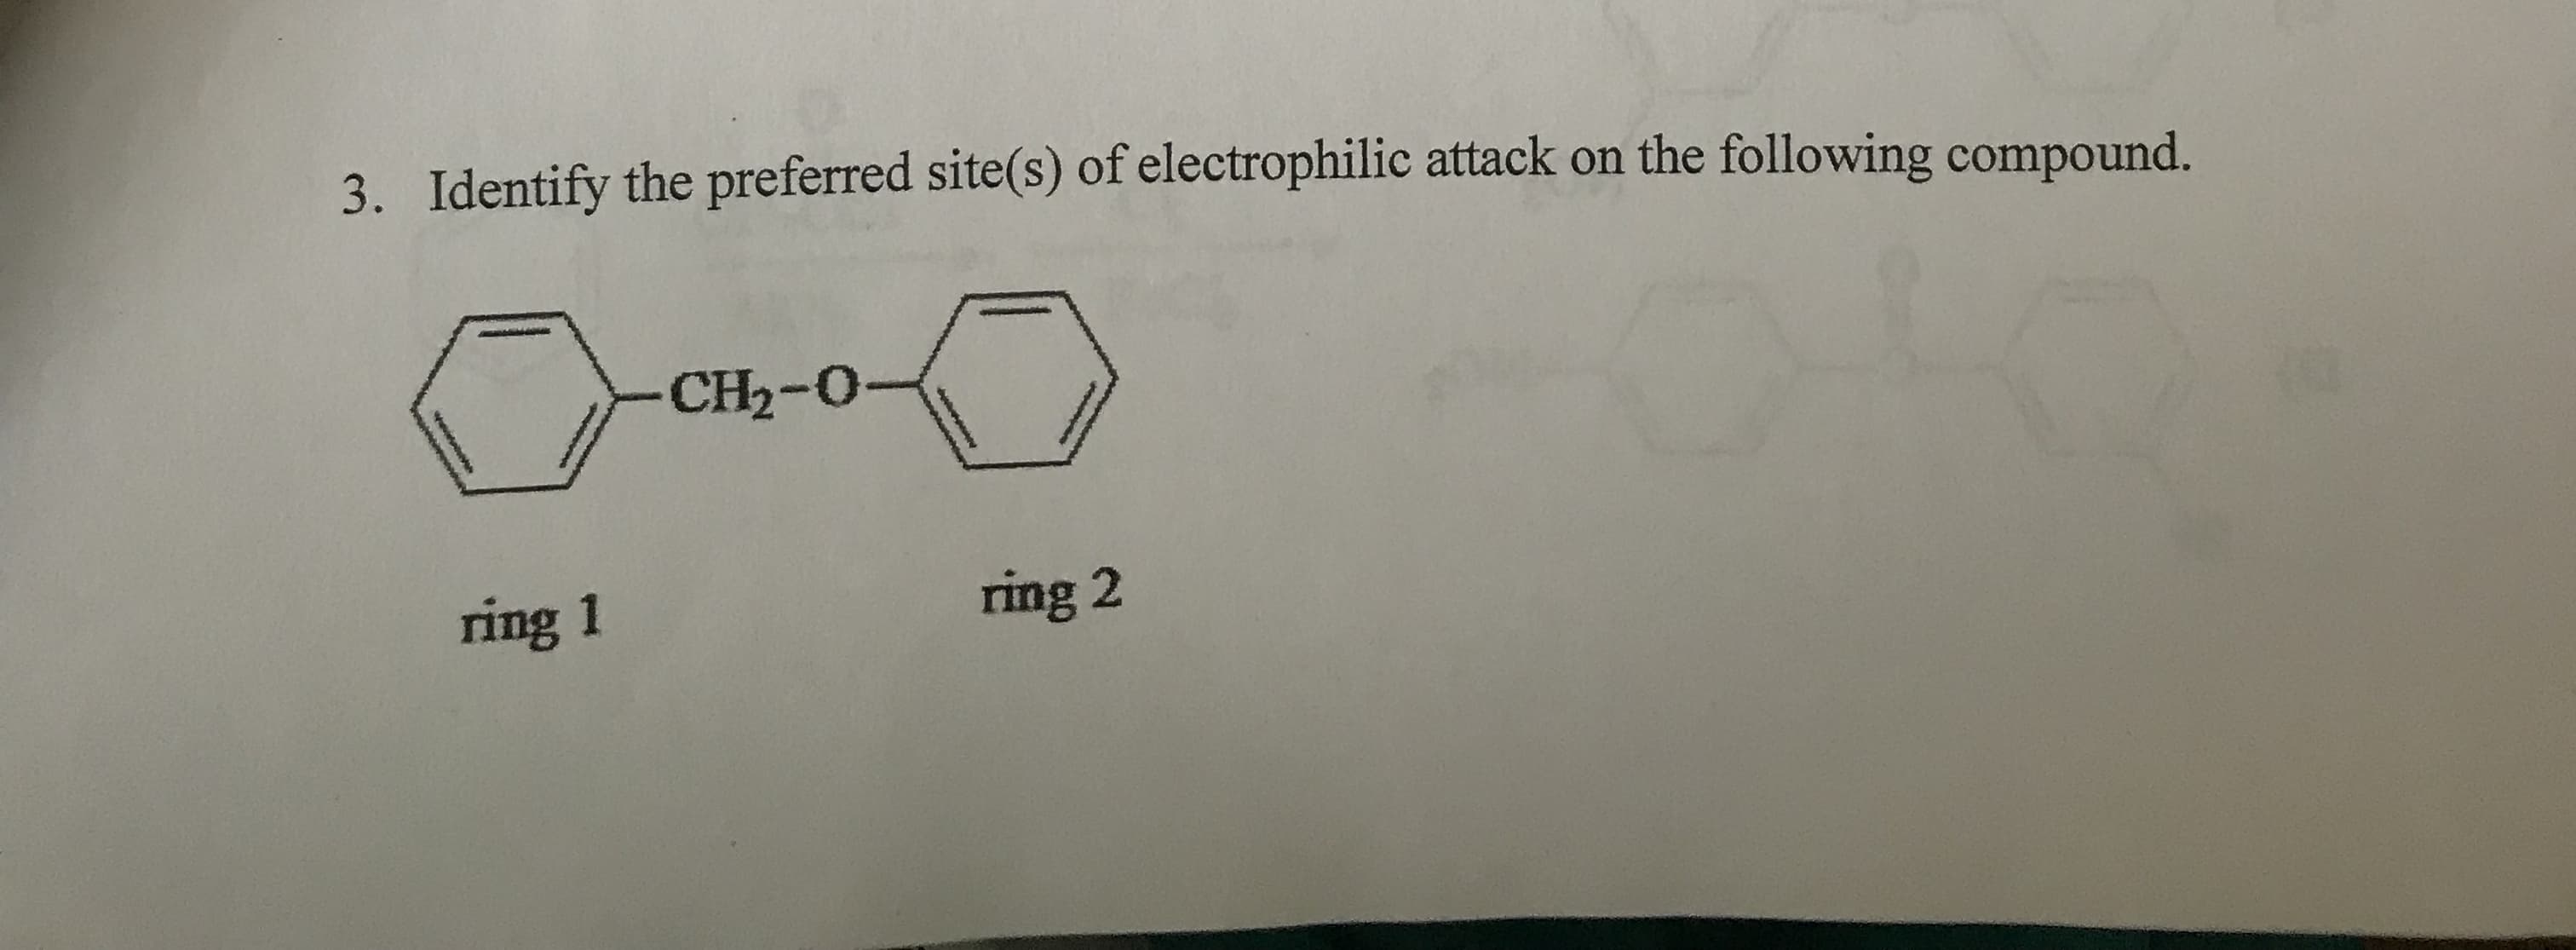 Identify the preferred site(s) of electrophilic attack on the following compound.
3.
CH2-0-
ring 1
ring 2
